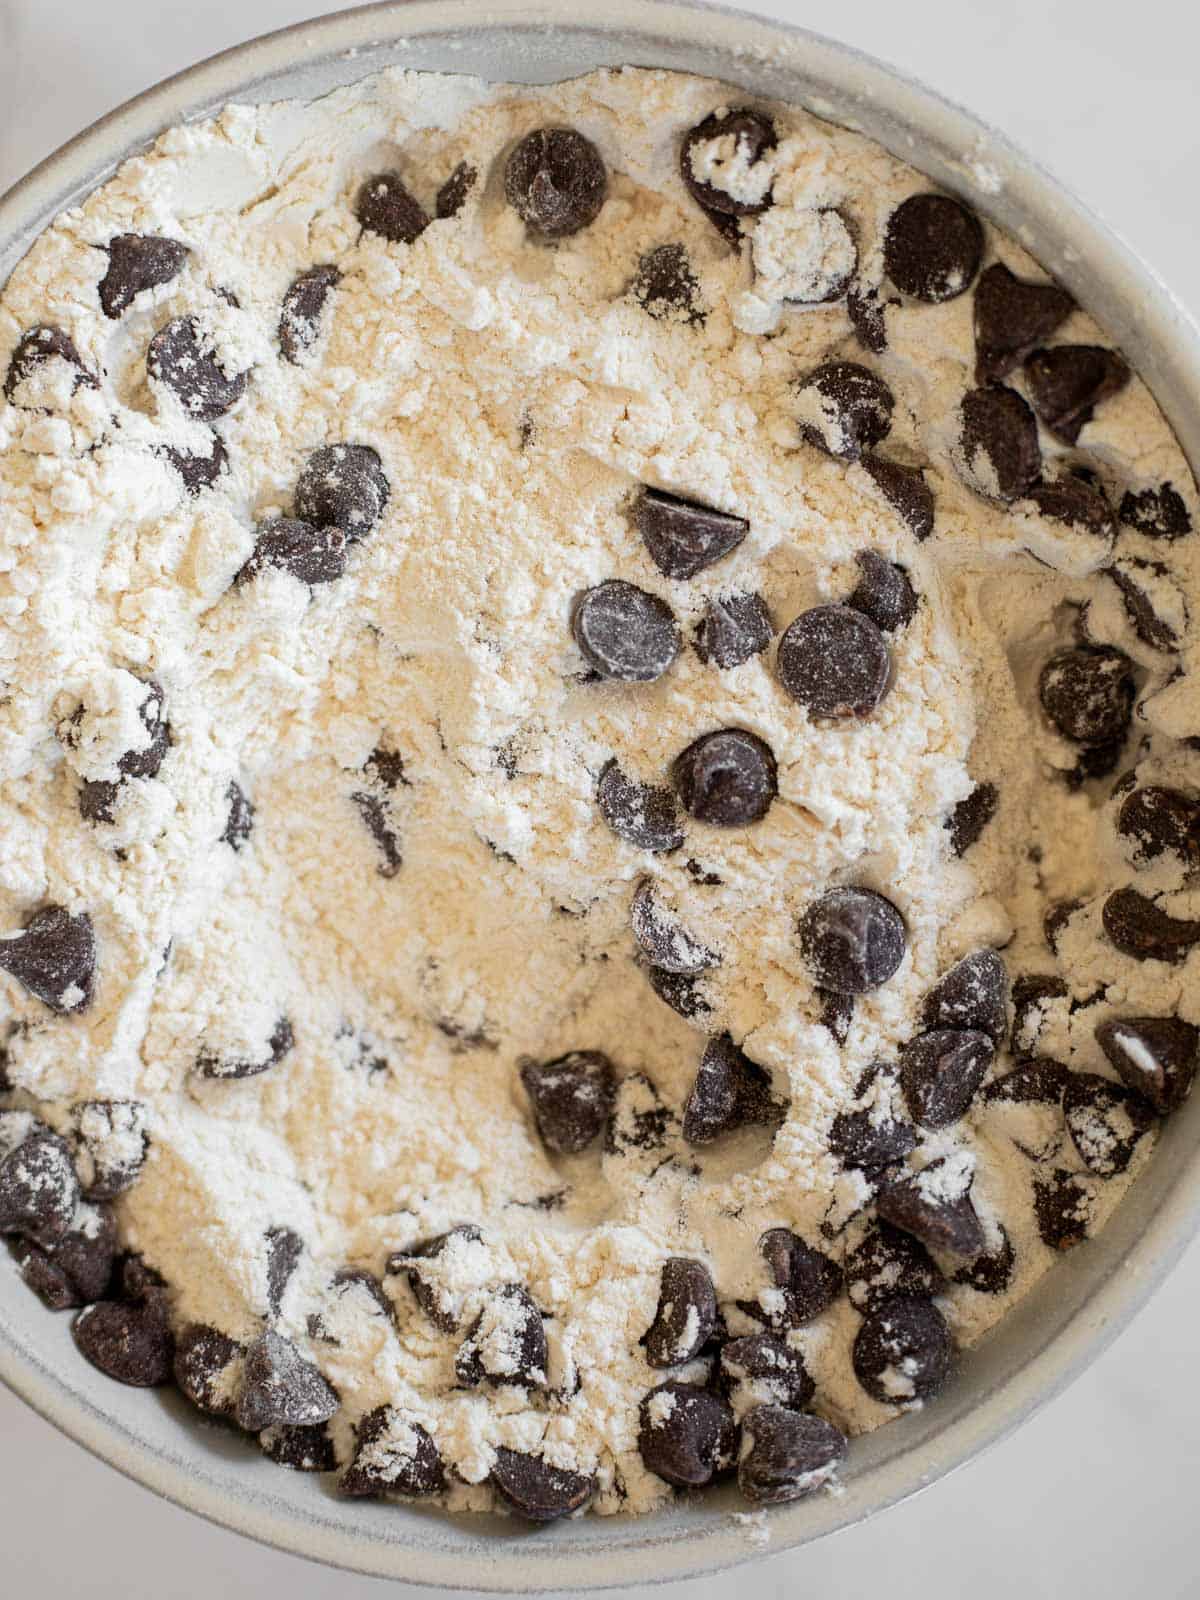 flour, baking soda, and chocolate chips whisked together.